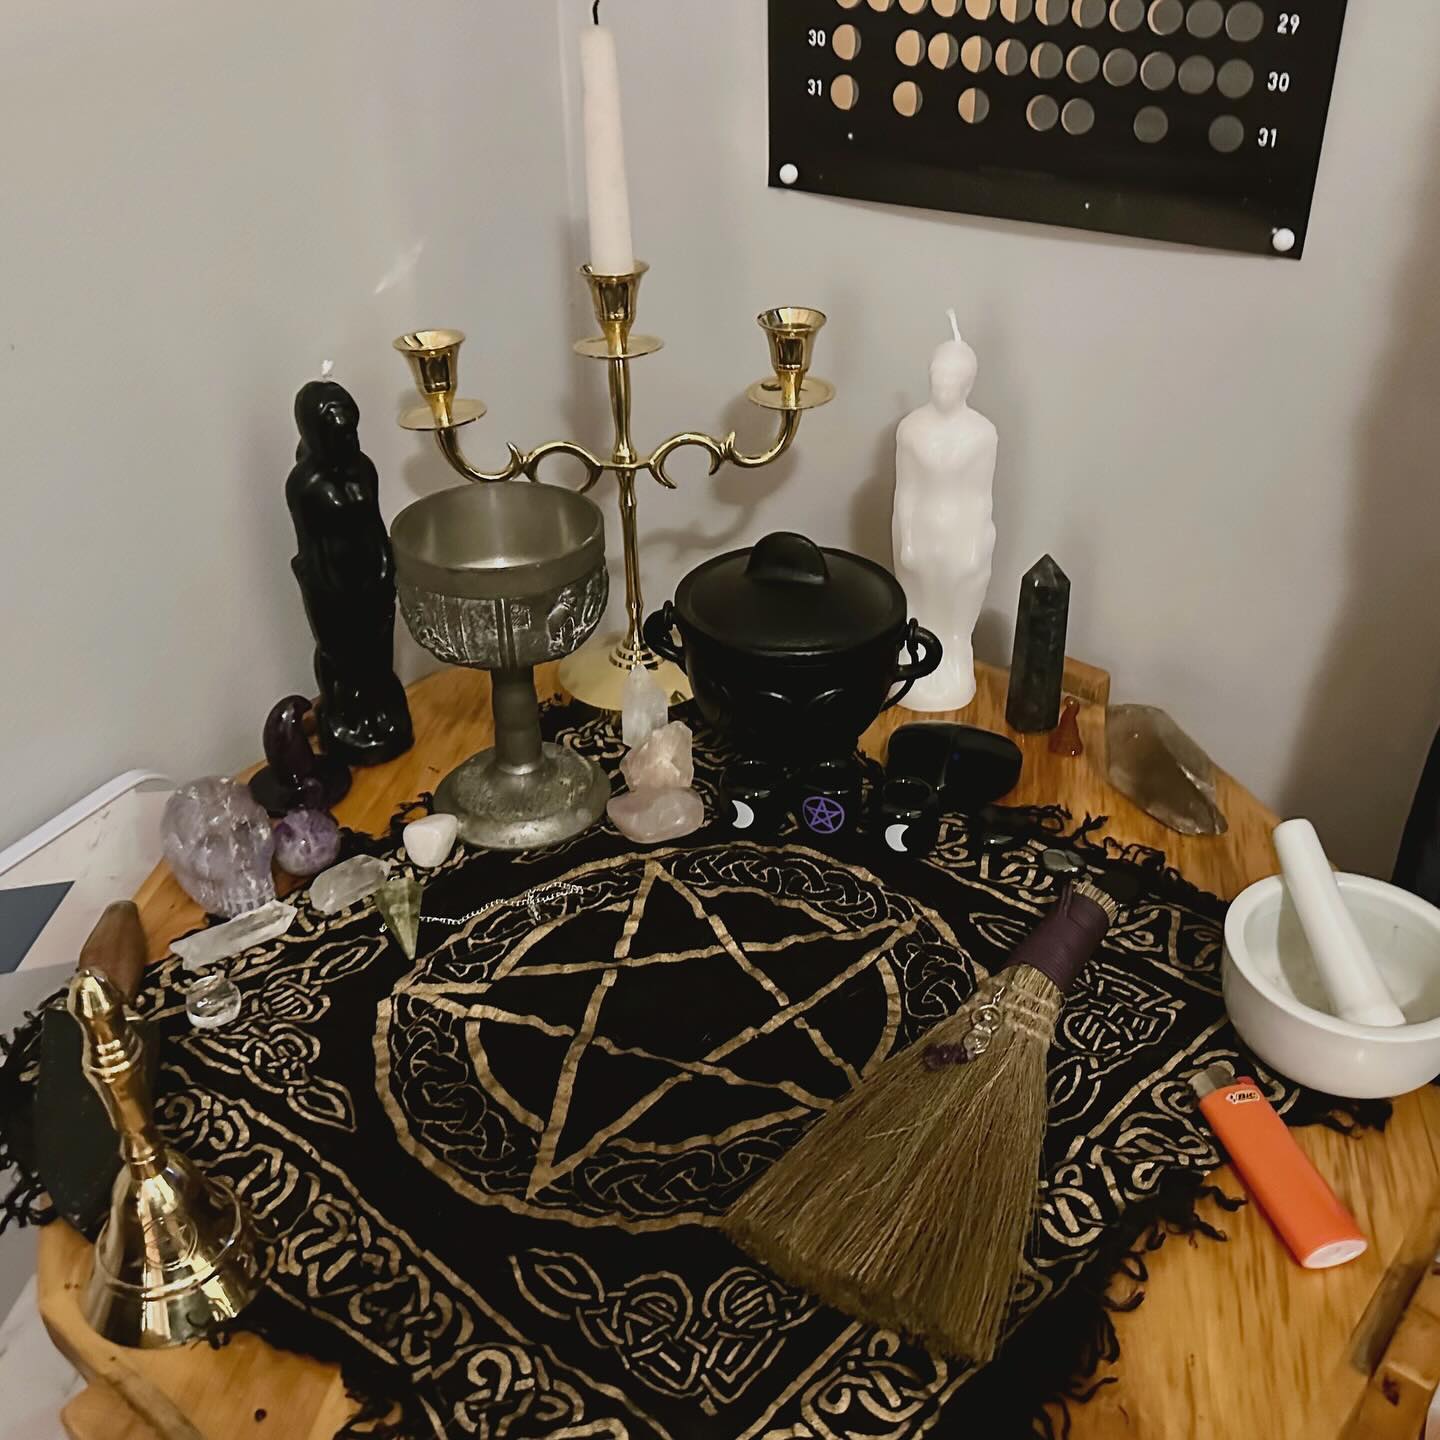 to healing and finding myself again 👏🏼✨🧘🏻‍♀️🤍

Life has been so hard lately. My heart seems to have different plans for me. From being diagnosed with POTS, IST, and now a heart murmur. 

I’ve been practicing Wicca/paganism daily for awhile now. I feel more grounded and better than ever. 📿😌🧘🏻‍♀️✨

Today I did online classes. One step at a time. One day at a time. 🫶🏼🤍🫶🏼🤍

-
#witch #witchesofinstagram #whitewitchcraft #whitewitch #paganism #cardiacproblems #pots #ist #heartmurmur #strong #resilient #focused #determined #healing #wiccan #wiccanpride #wiccanlife 🌿